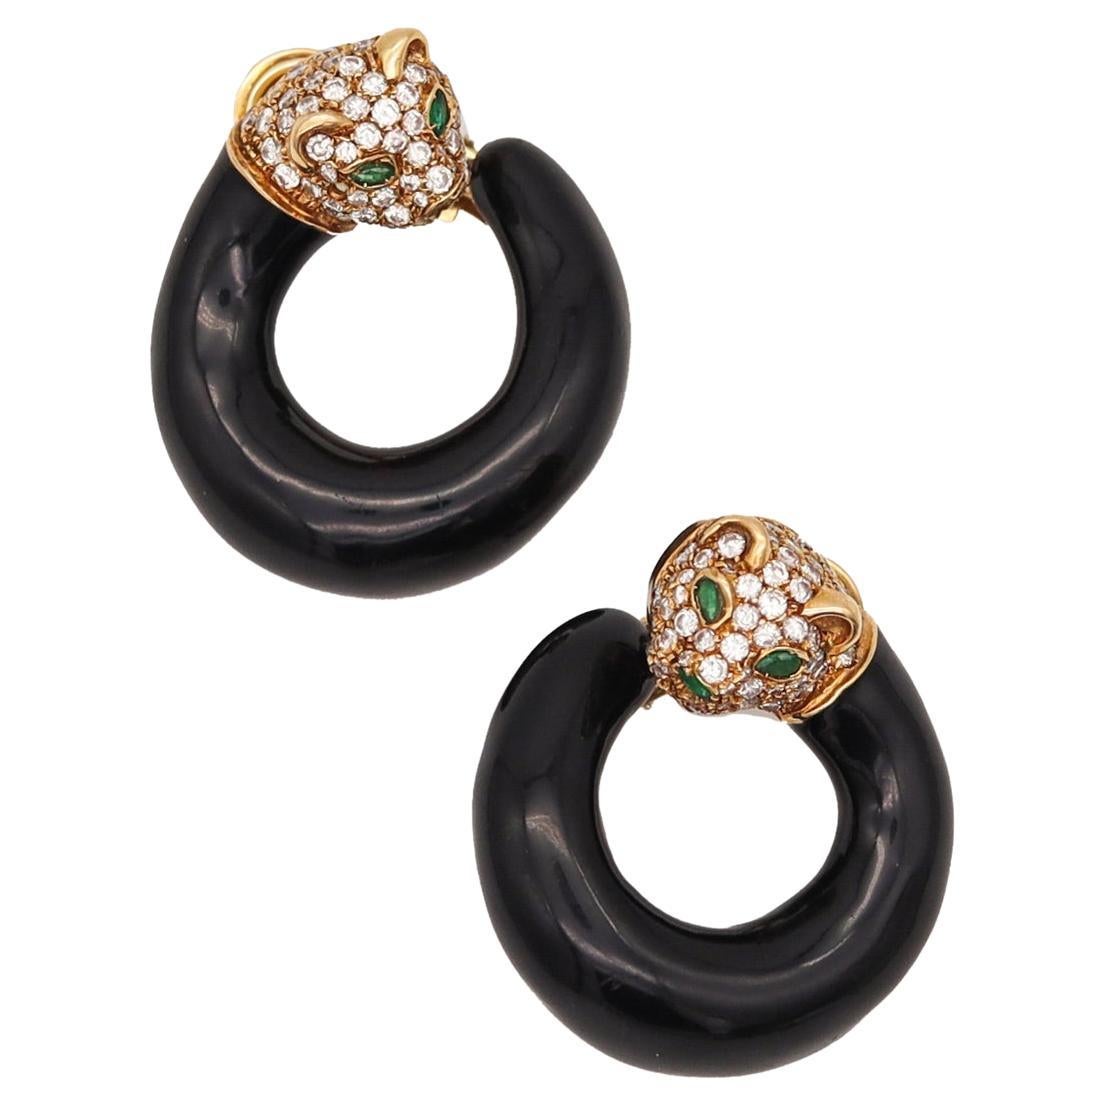 Fred of Paris Enamel Panther Clips Earrings 18kt Yellow Gold 3.56 Ctw in Diamond For Sale